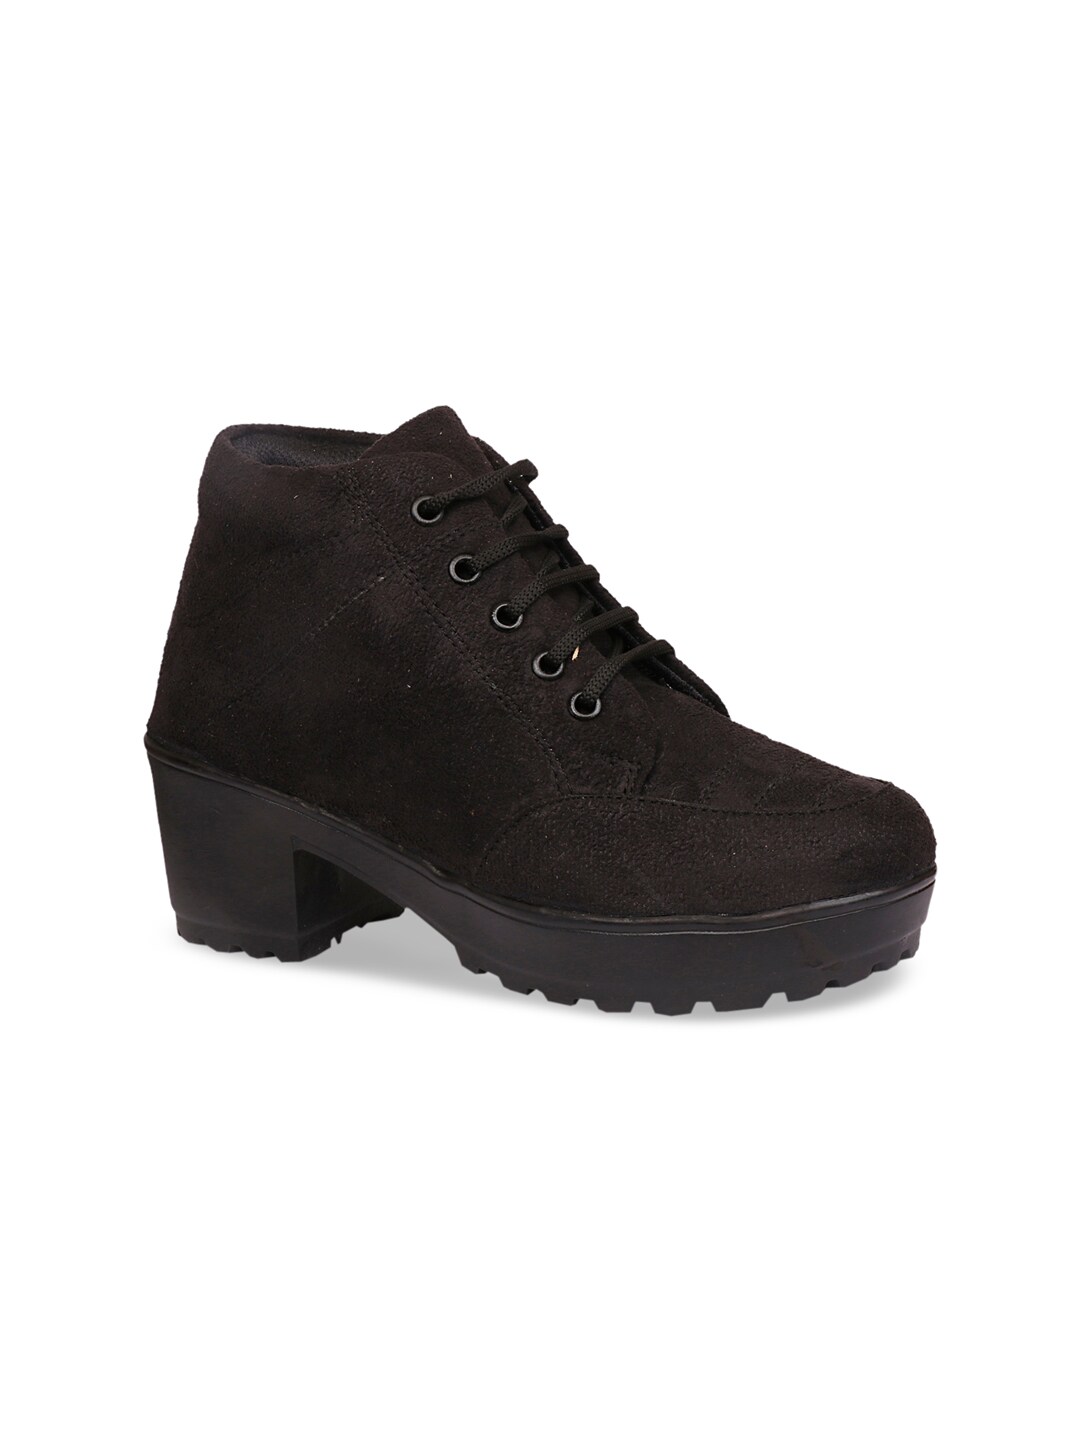 Sanhose Women Black Solid Suede Block Heeled Boots Price in India